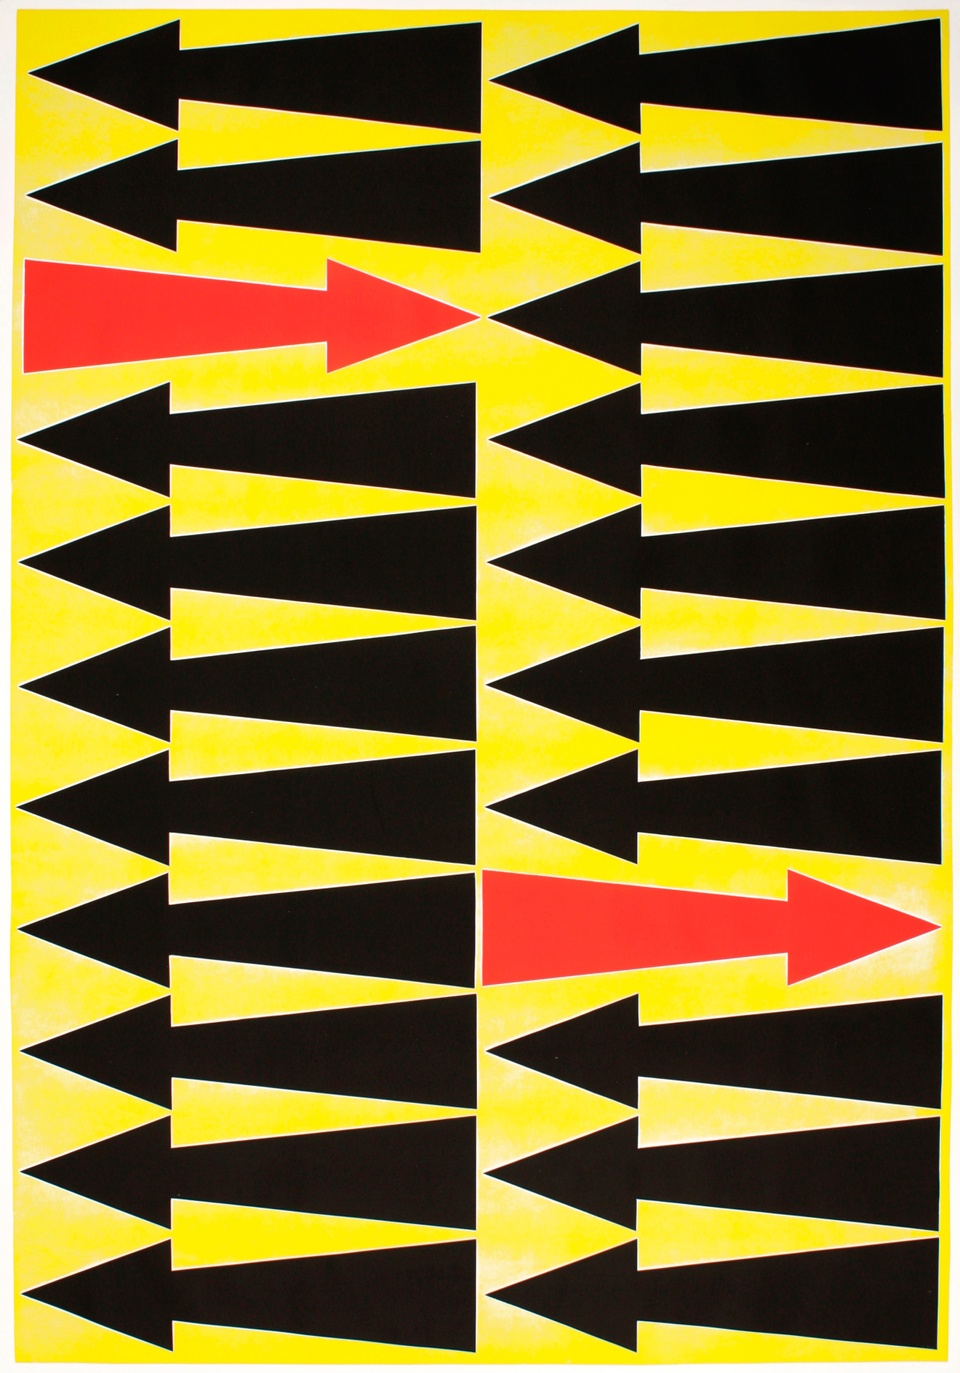 Graphic image of yellow field with many black arrows pointing left and two red arrows pointing right